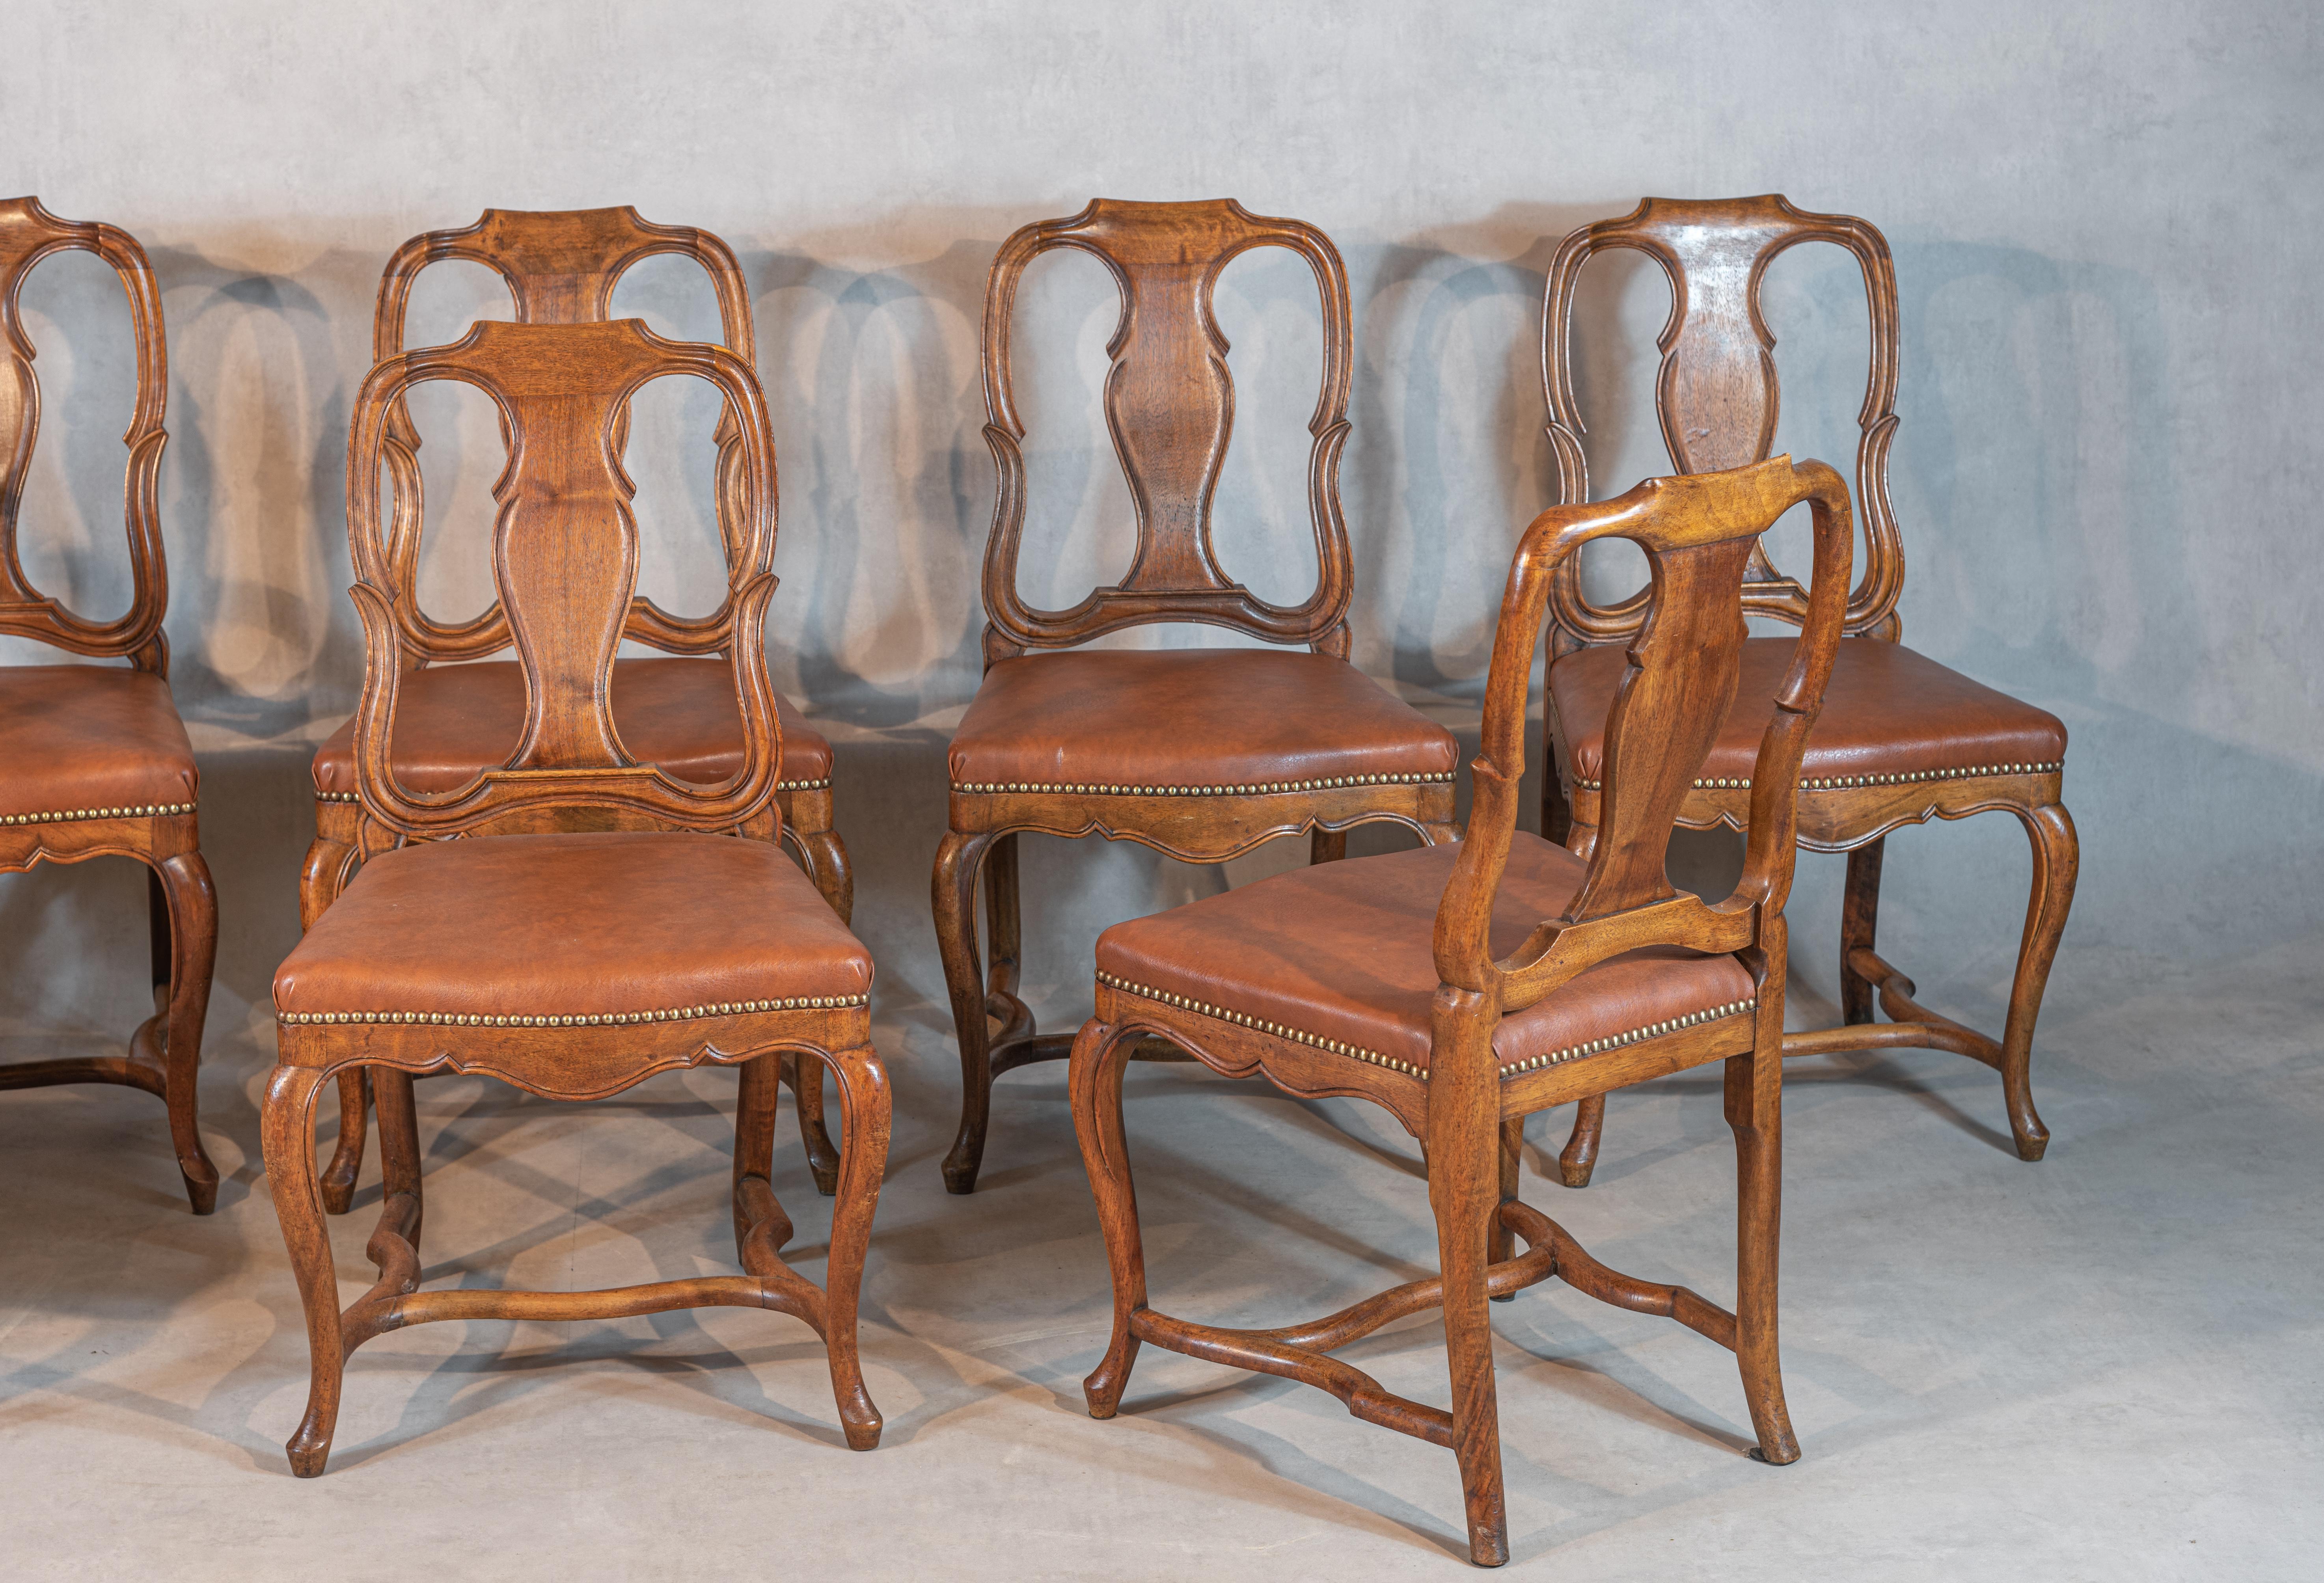 Refined and imposing, this set of eight French 19th-century Empire-style walnut chairs is a stunning example of traditional craftsmanship. The solid walnut construction of these chairs ensures both durability and beauty. The unique design and allure